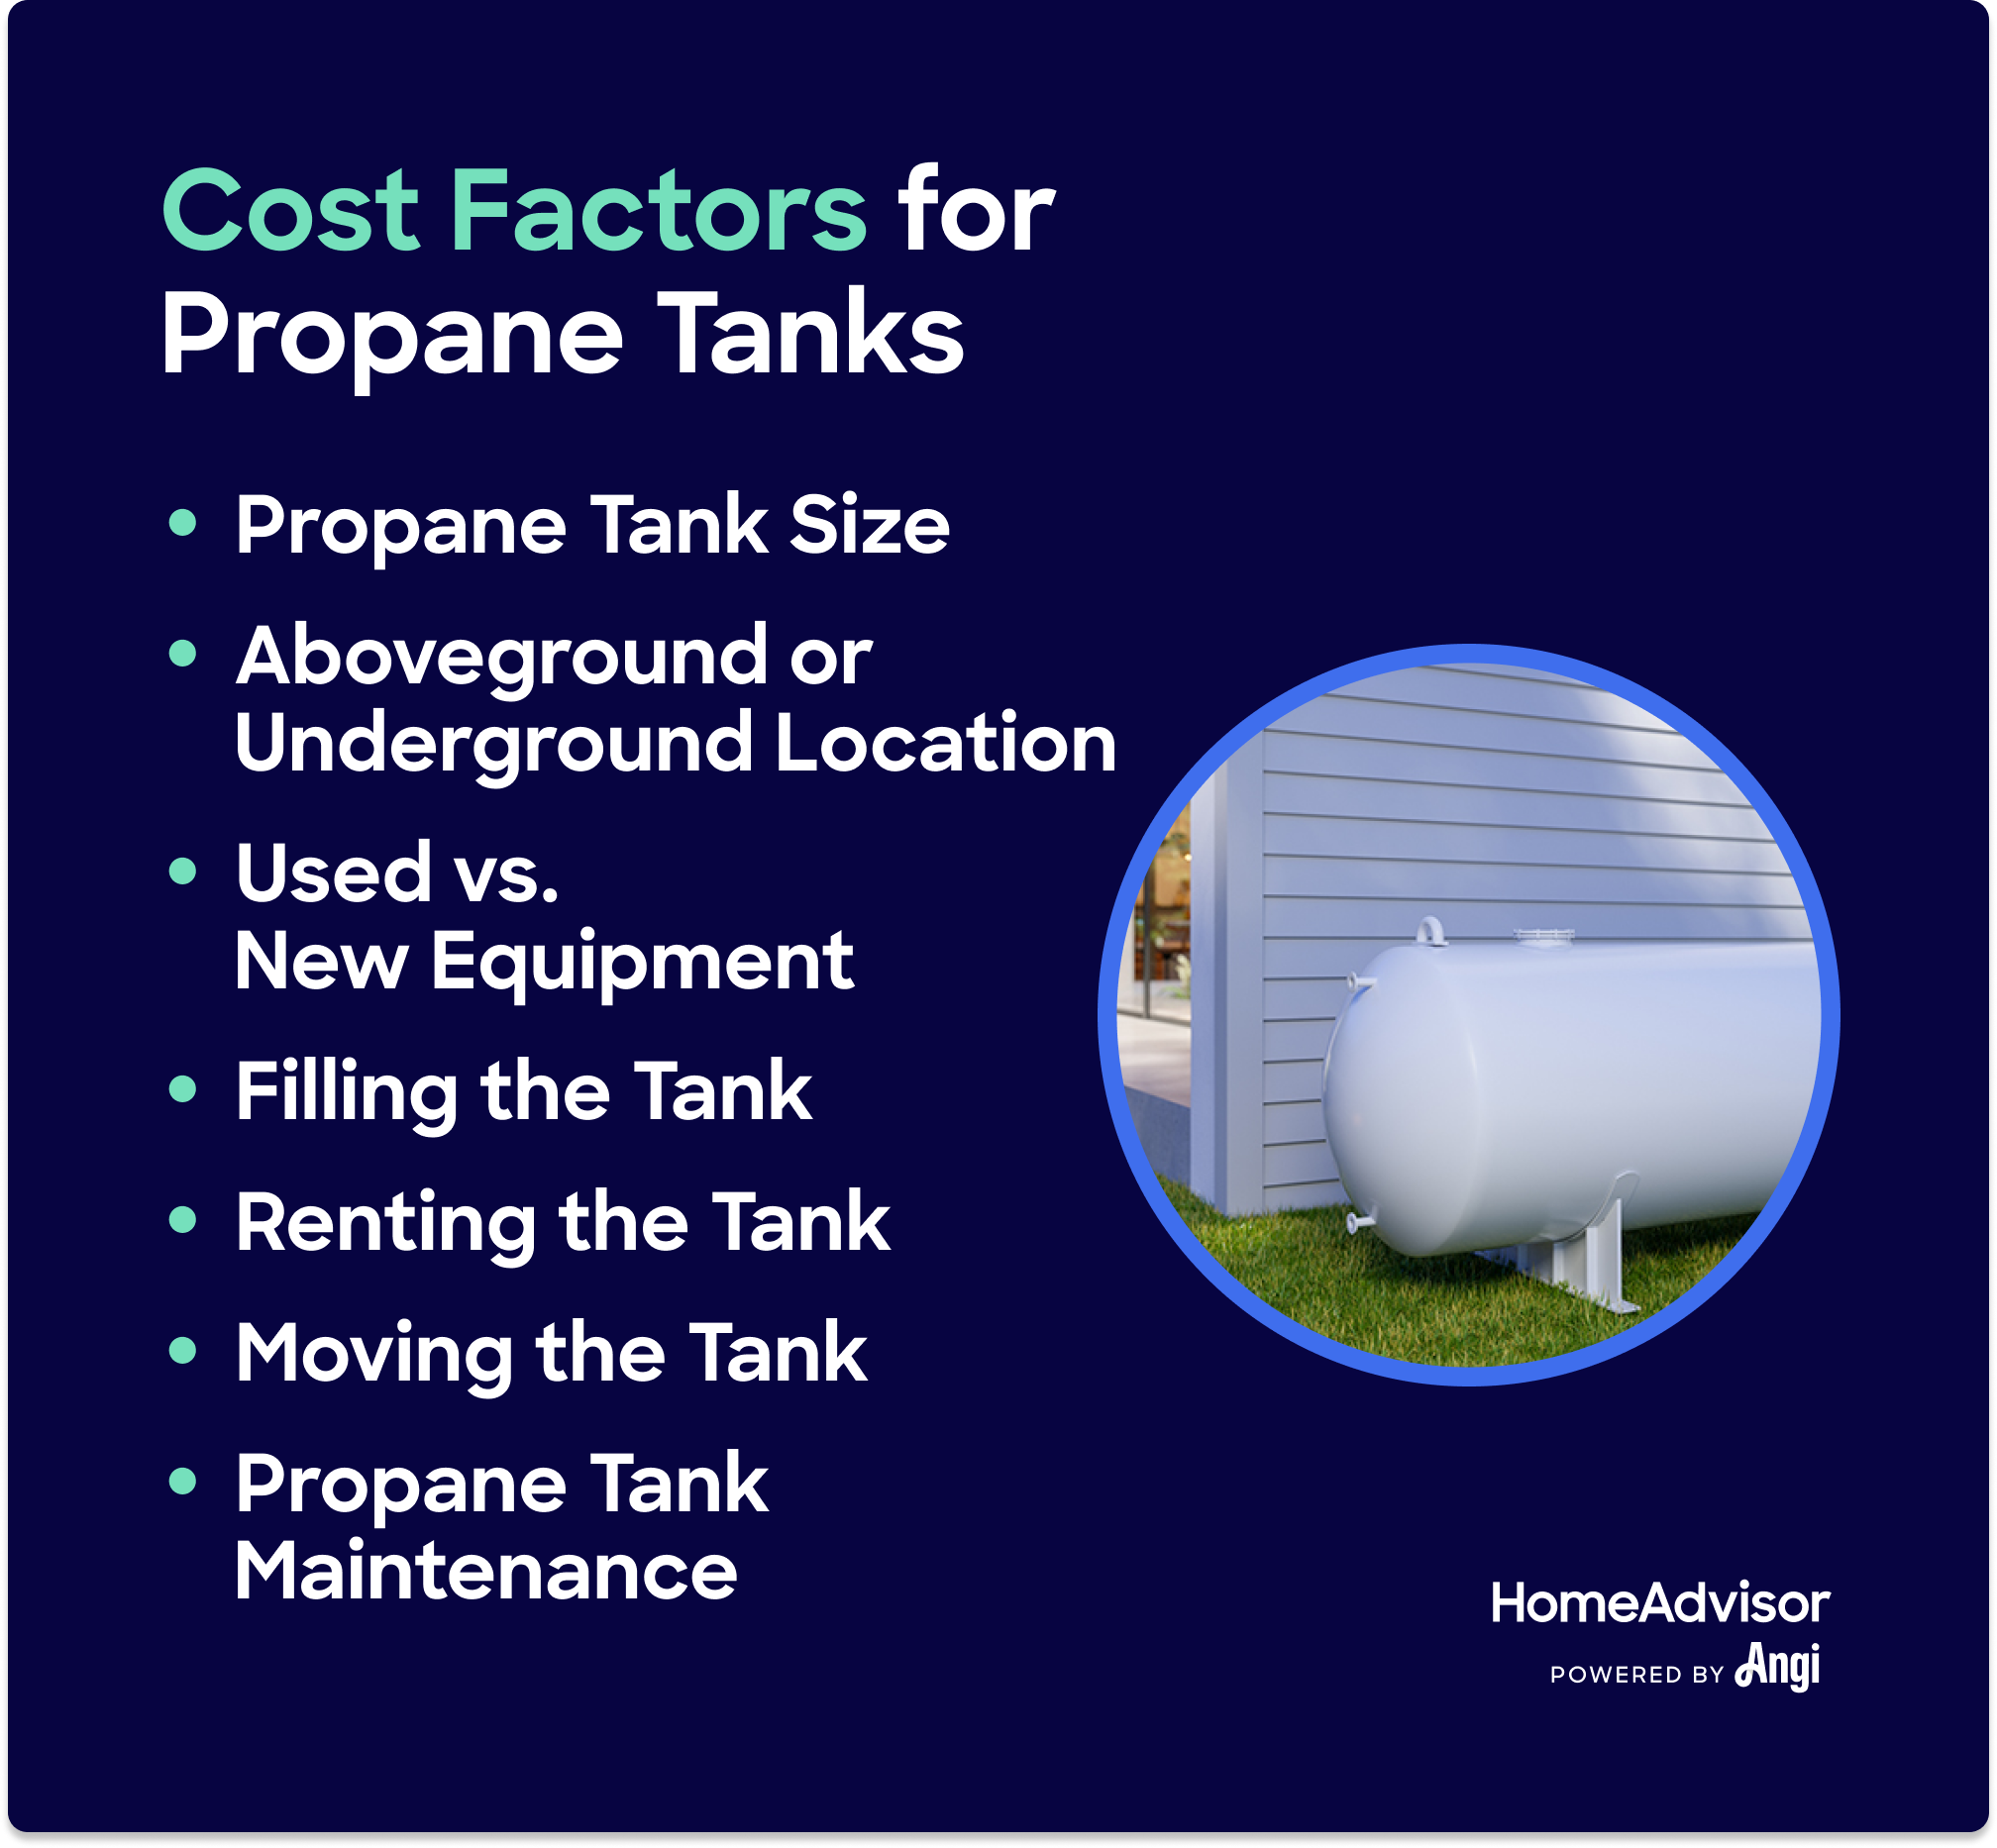 7-cost-factors-for-propane-tanks-including-aboveground-or-underground